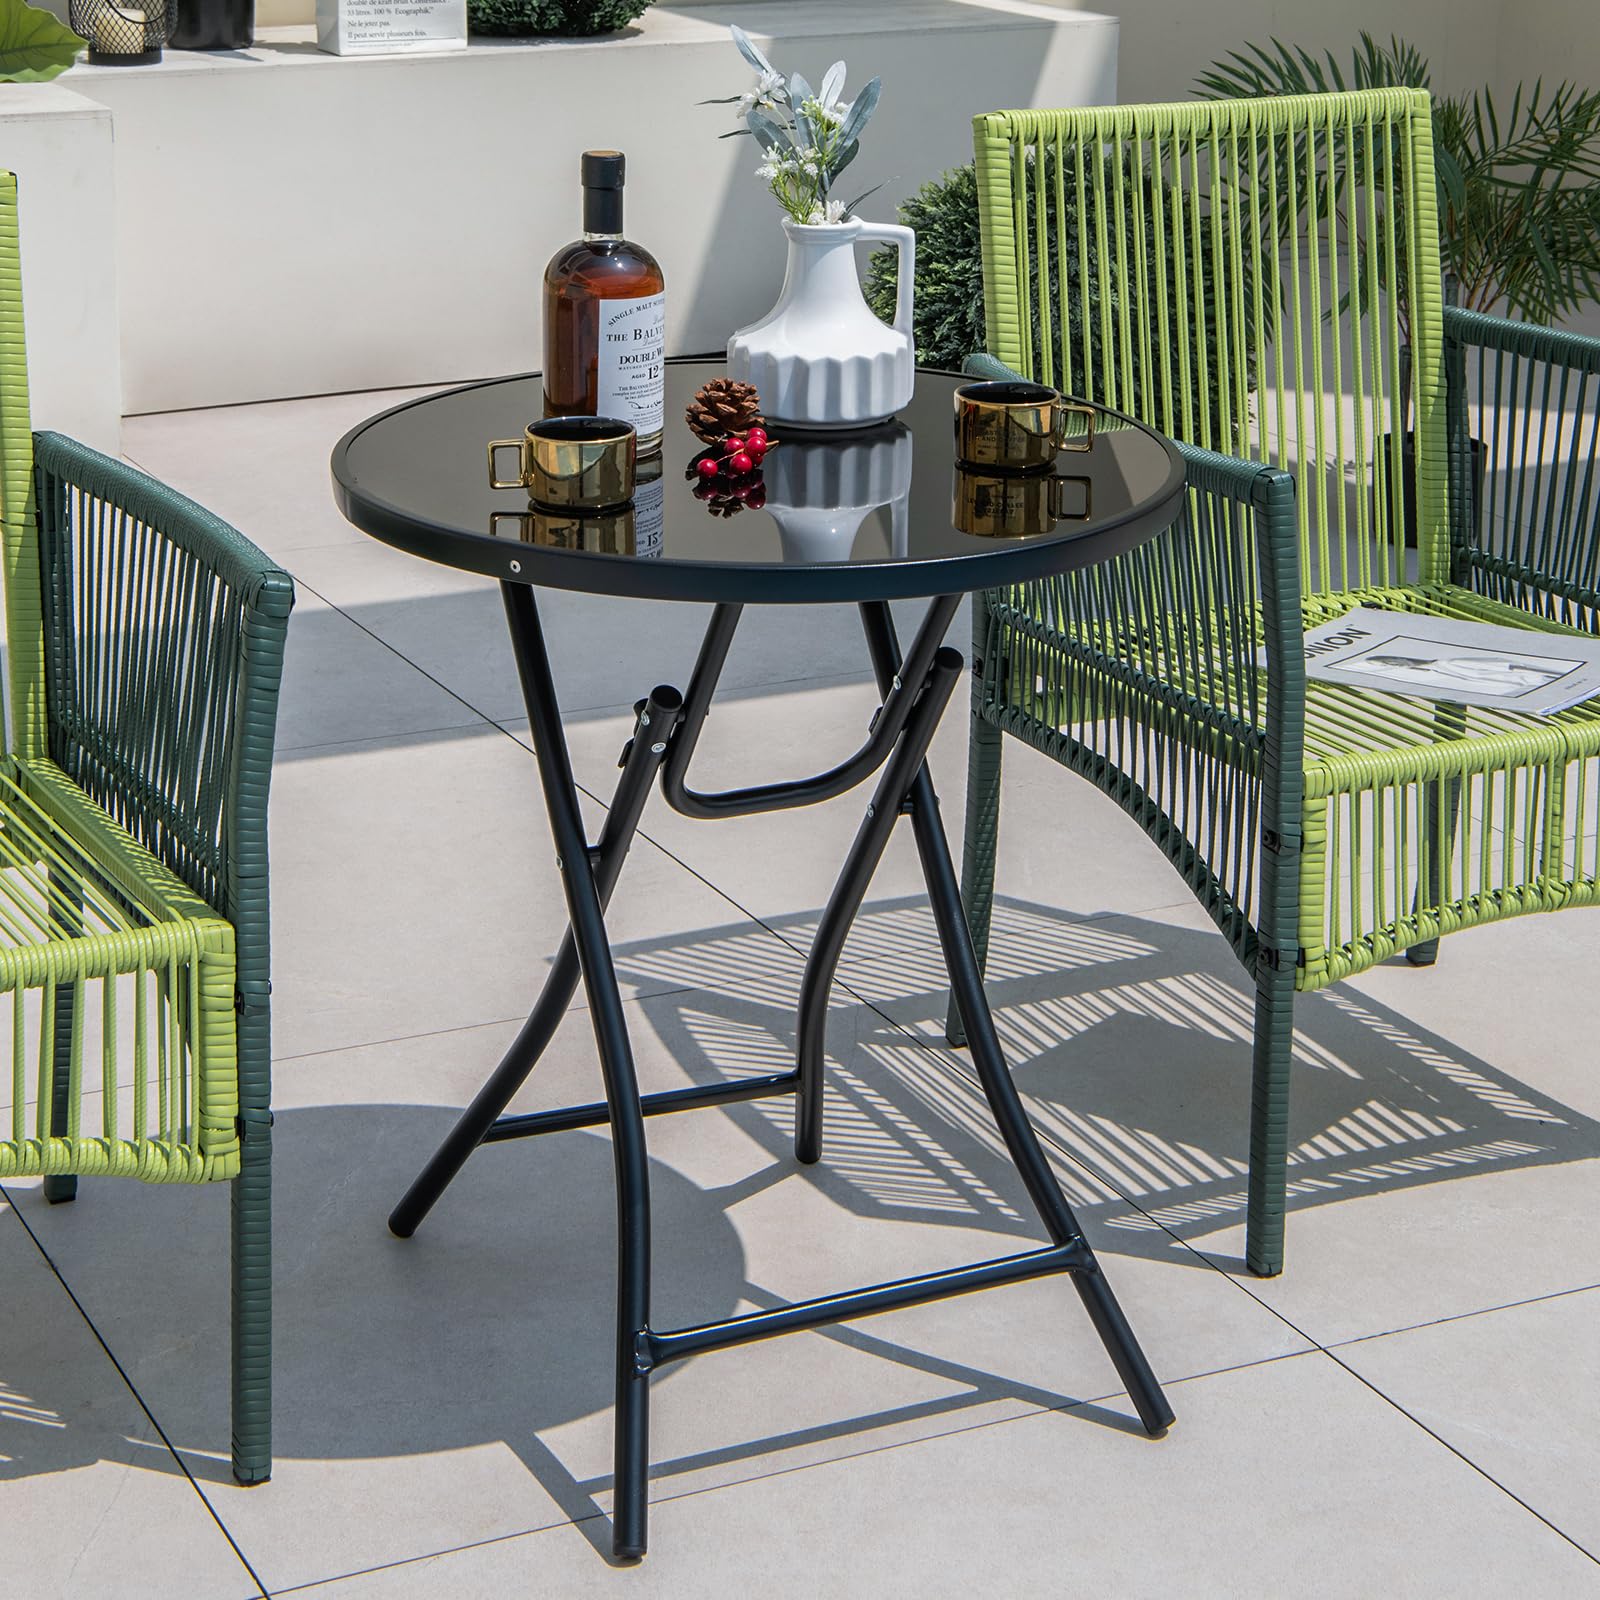 Giantex 23 Inch Round Bistro Table, Patio Folding Cocktail Table with Tempered Glass Tabletop